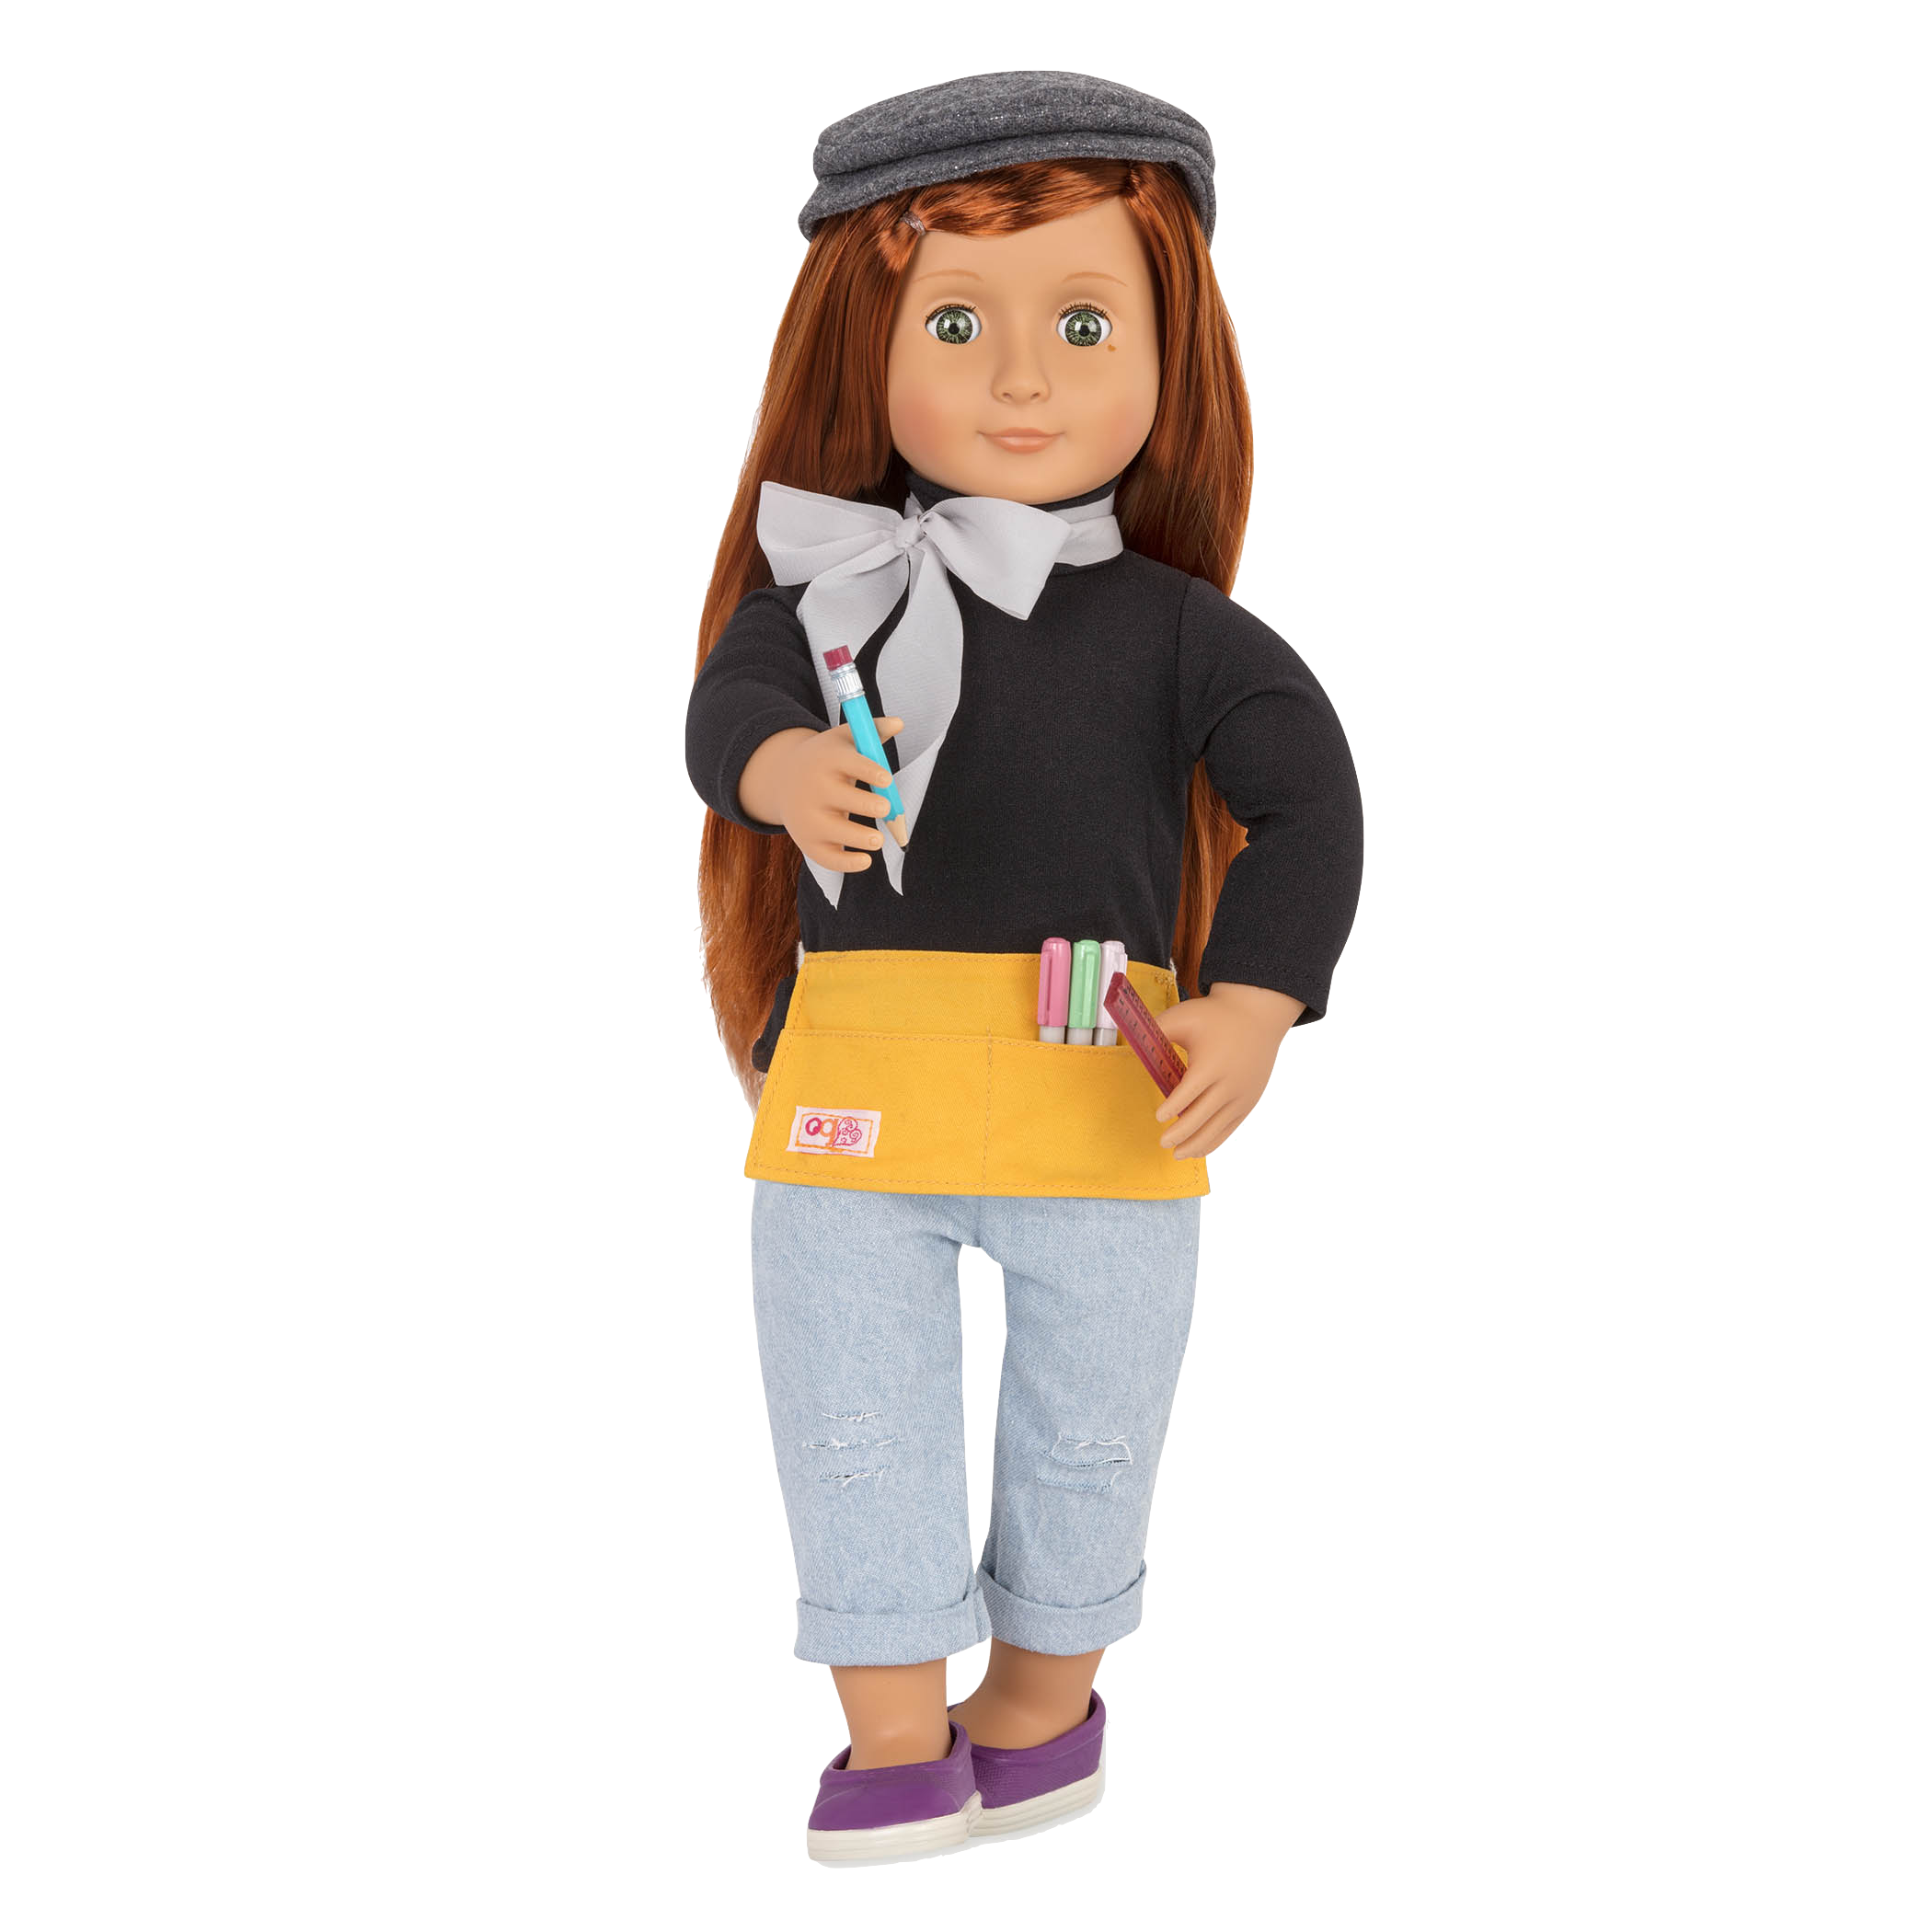 Sabina doll wearing outfit